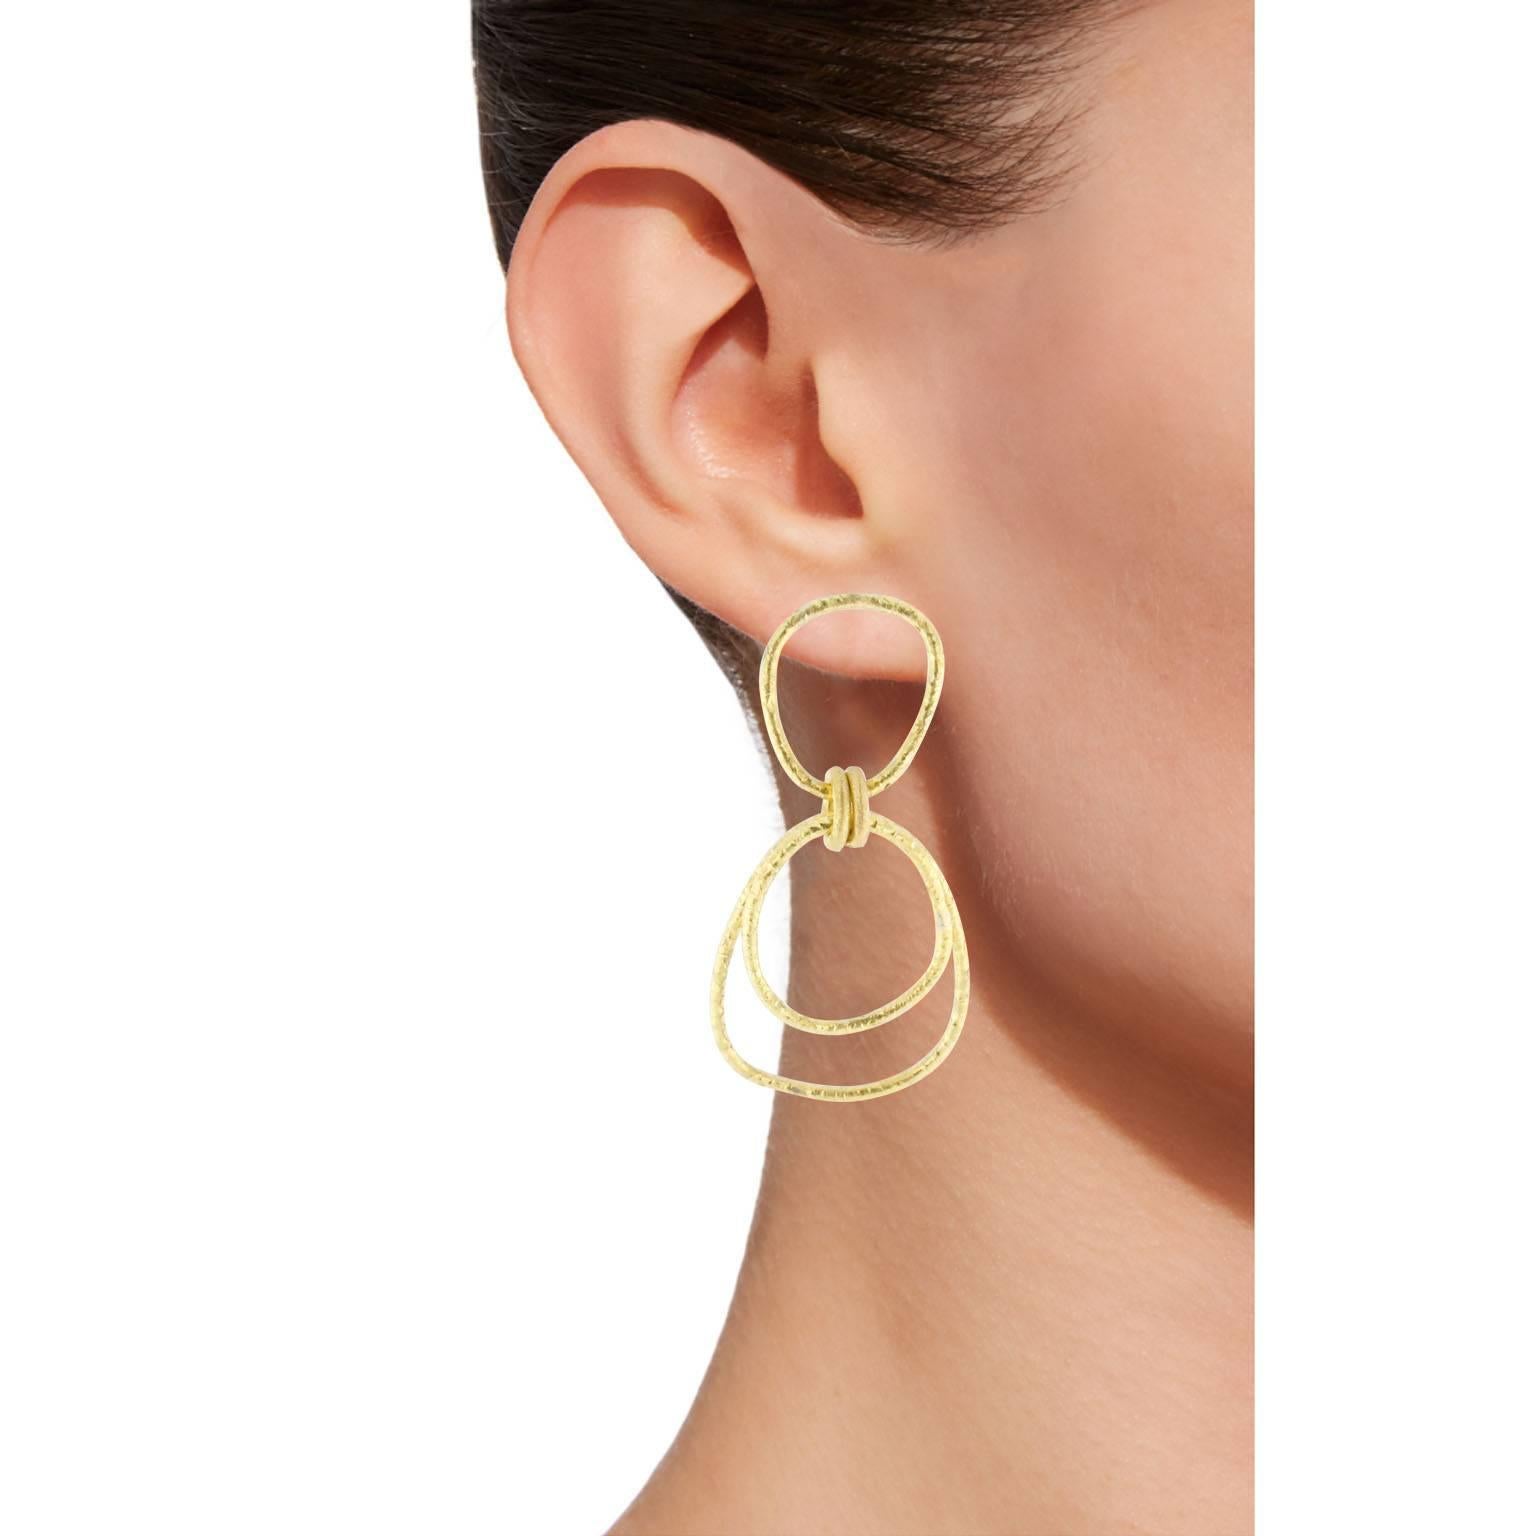 Jona design collection, hand crafted in Italy, 18 Karat yellow gold irregular hoop link pendant earrings.
DIMENSIONS: 1.87 in. H x 0.90 in. W x 0.27 in. D - 47 mm. H x 23 mm. W x 7 mm. D
All Jona jewelry is new and has never been previously owned or